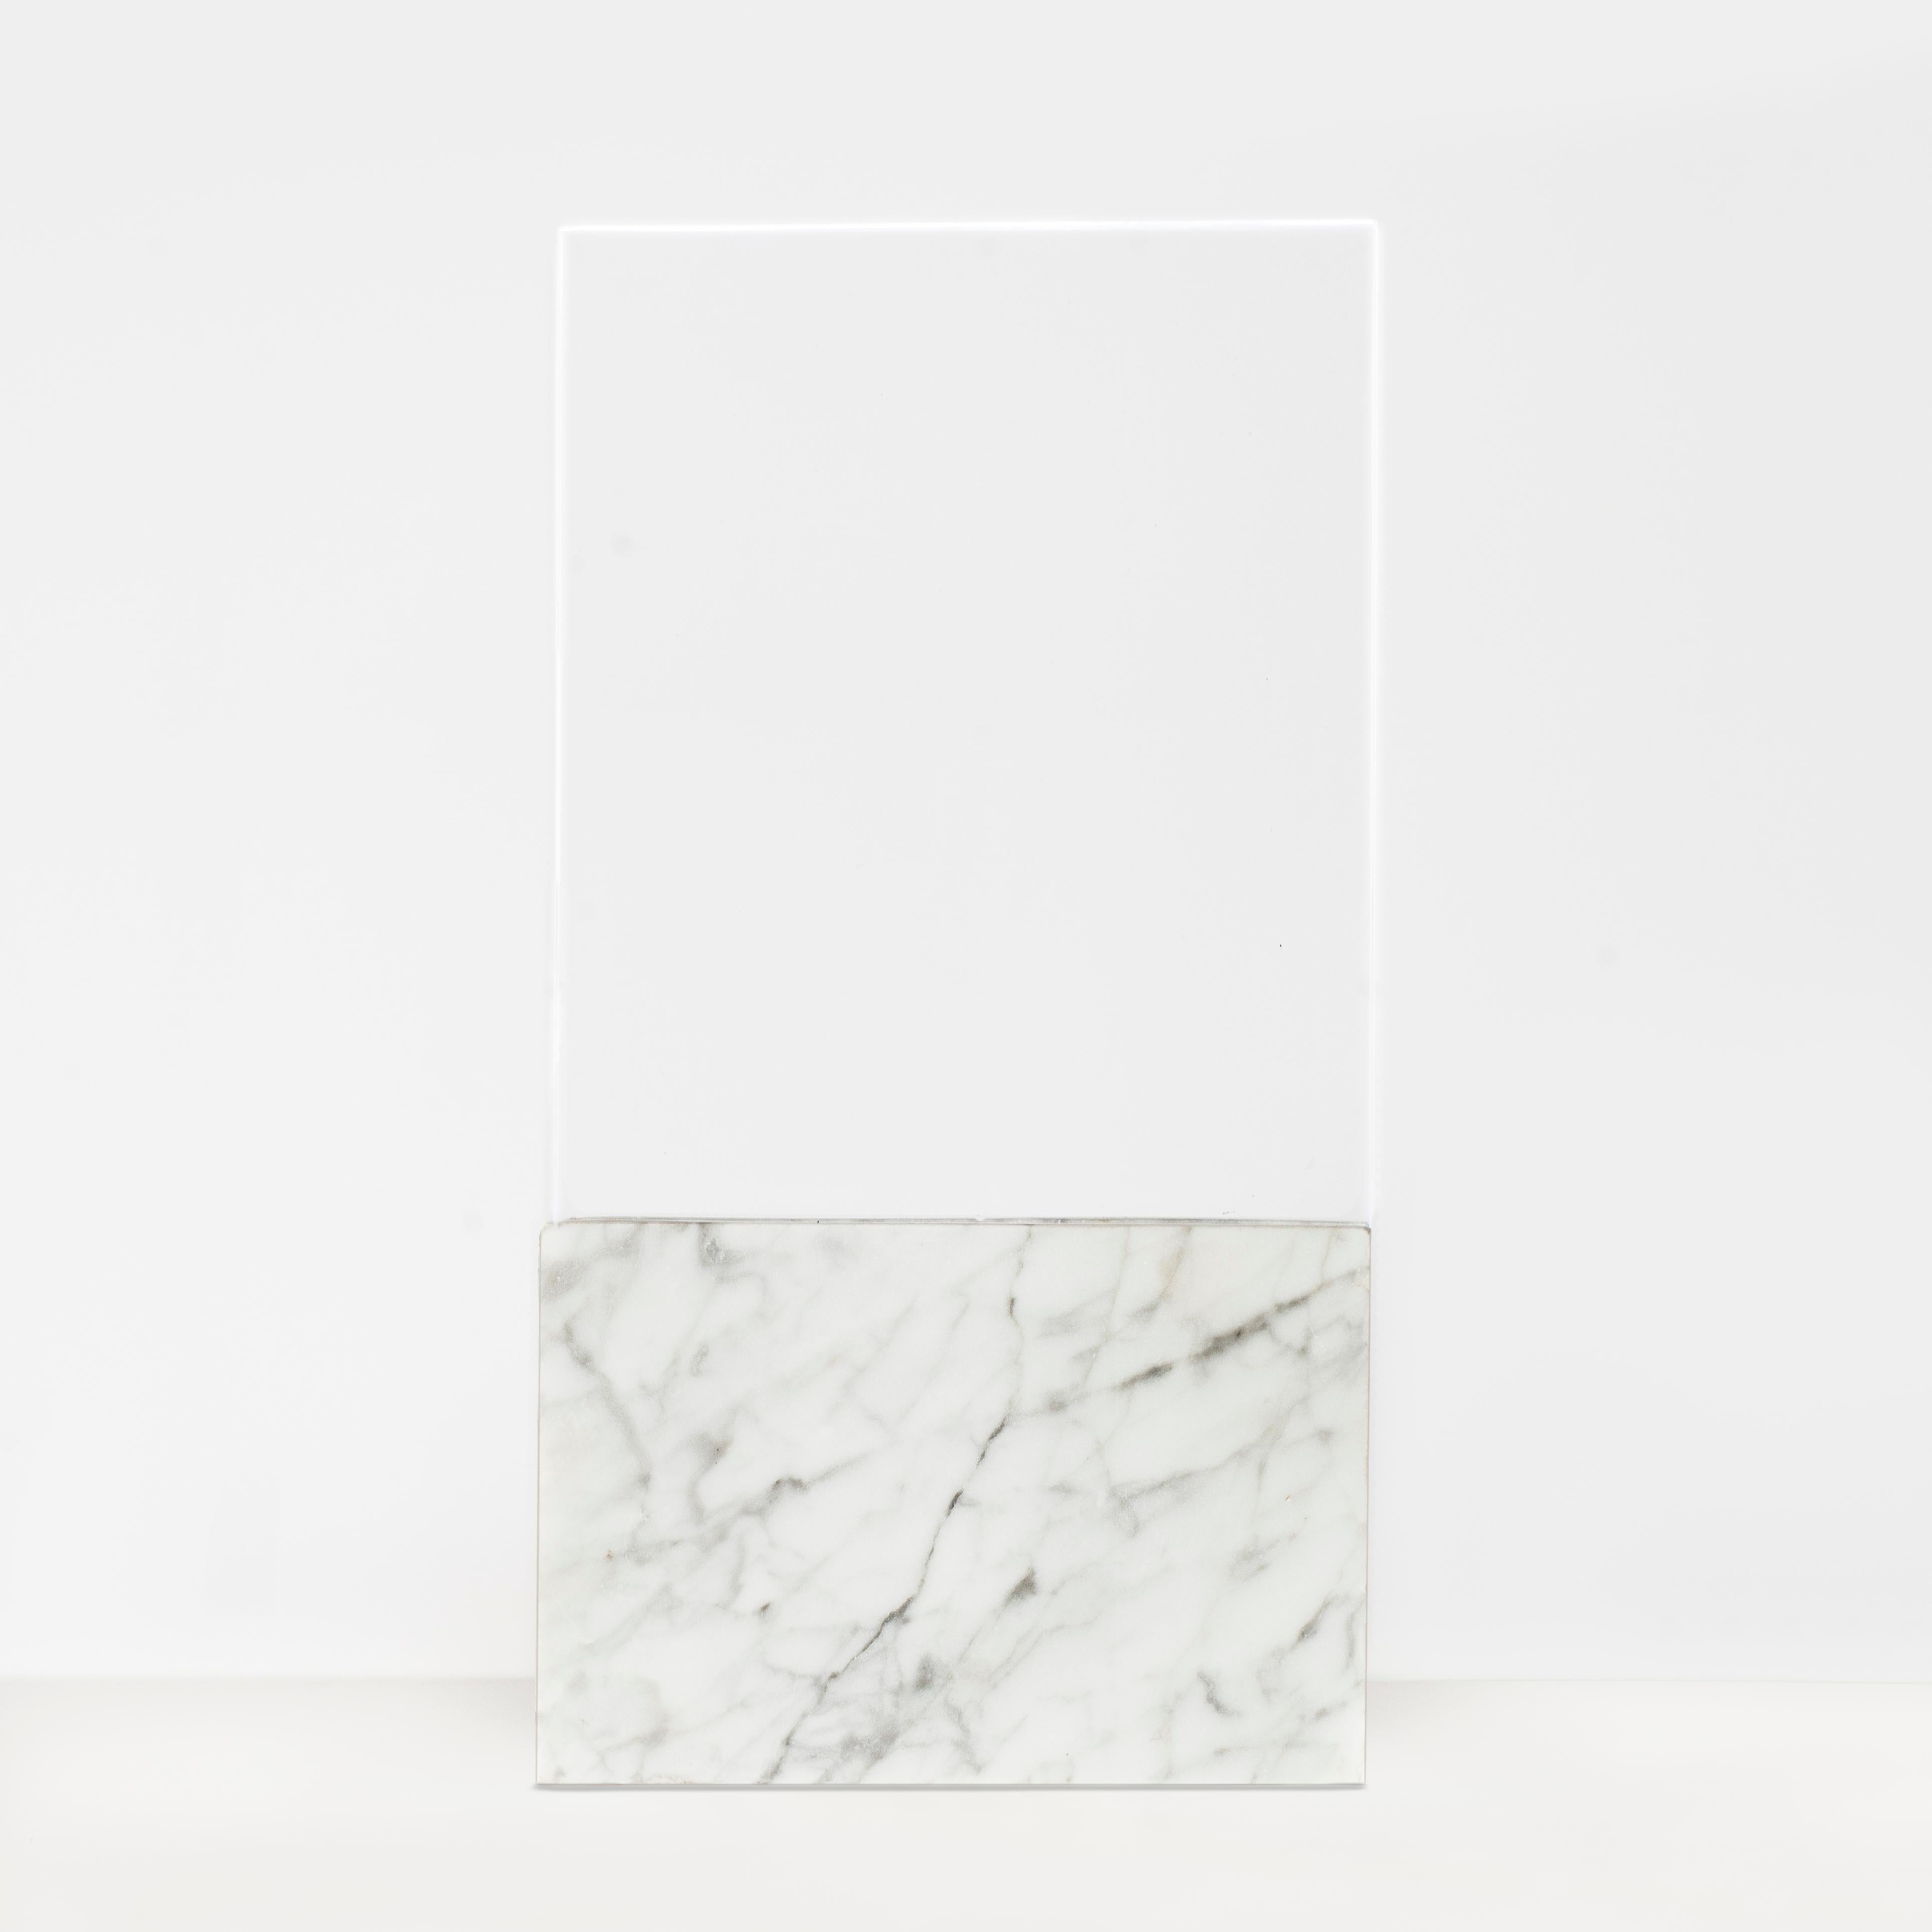 Black Horizon, glass and marble table lamp by Carlos Aucejo
Dimensions: 36 x 19 x 7 cm
Materials: Glass and marble, (Exist in Marquina (black) and Carrara (white)). 

In this piece, we try to create a luminous atmosphere in the space through the